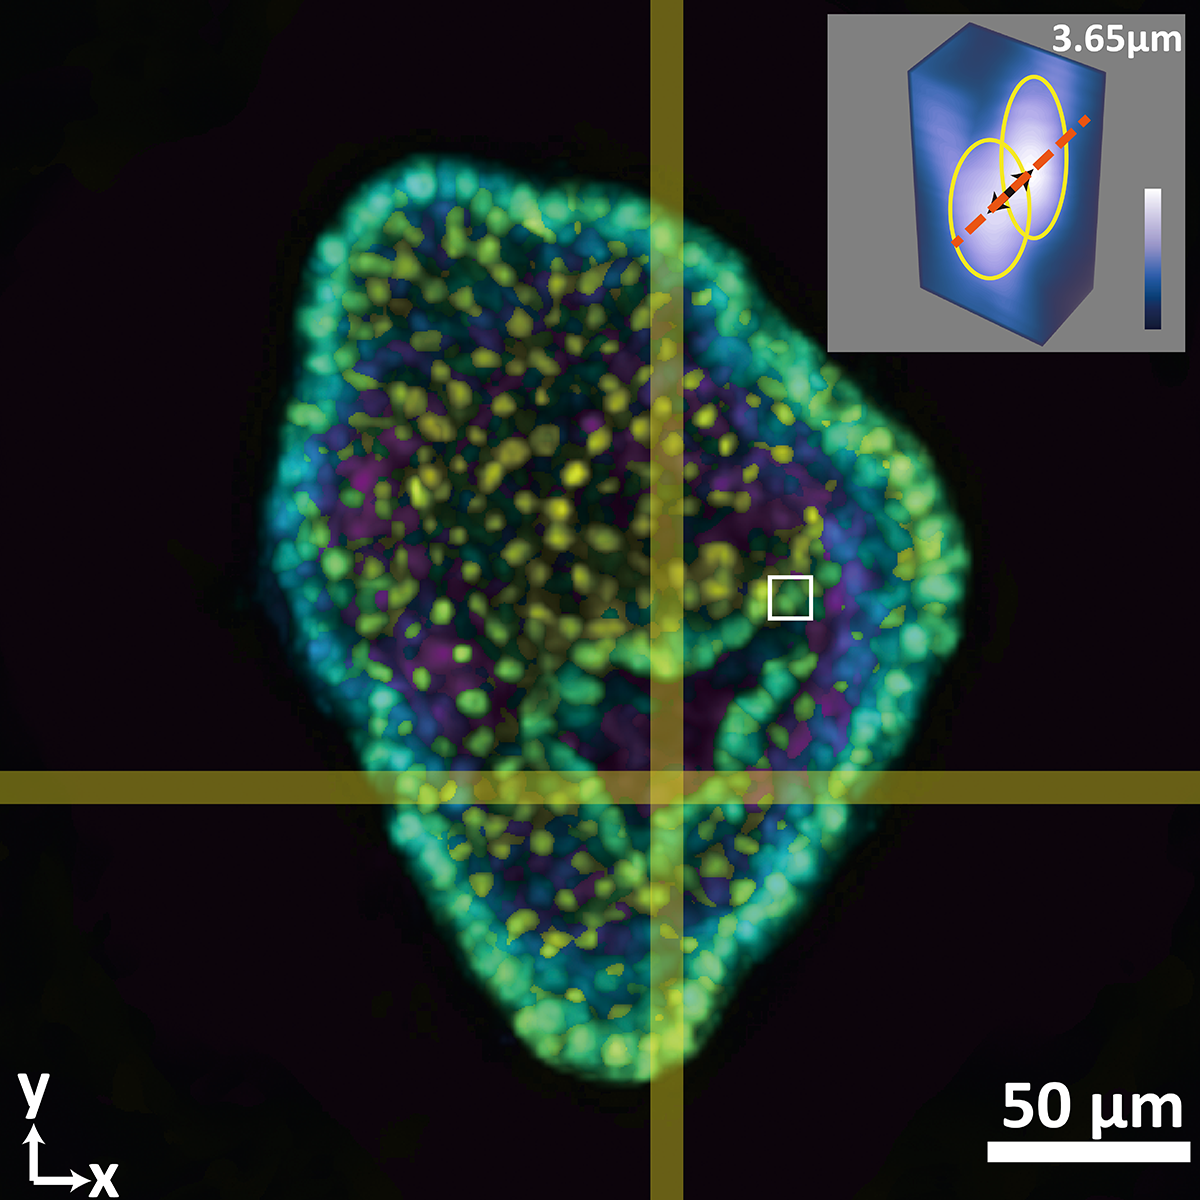 This composite image shows a colon organoid with stained cell nuclei reconstructed from a raw image taken by a new system developed in the Coulter Department. The large image shows depth color coded from yellow (-56.2 micrometers from the focal plane) to purple (+56.2 micrometers from the focal plane). The inset shows a tight crop of the distance between two cells of 3.65 micrometers. The single raw image was captured in 0.1 seconds. (Image Courtesy: Shu Jia &amp; Wenhao Liu)